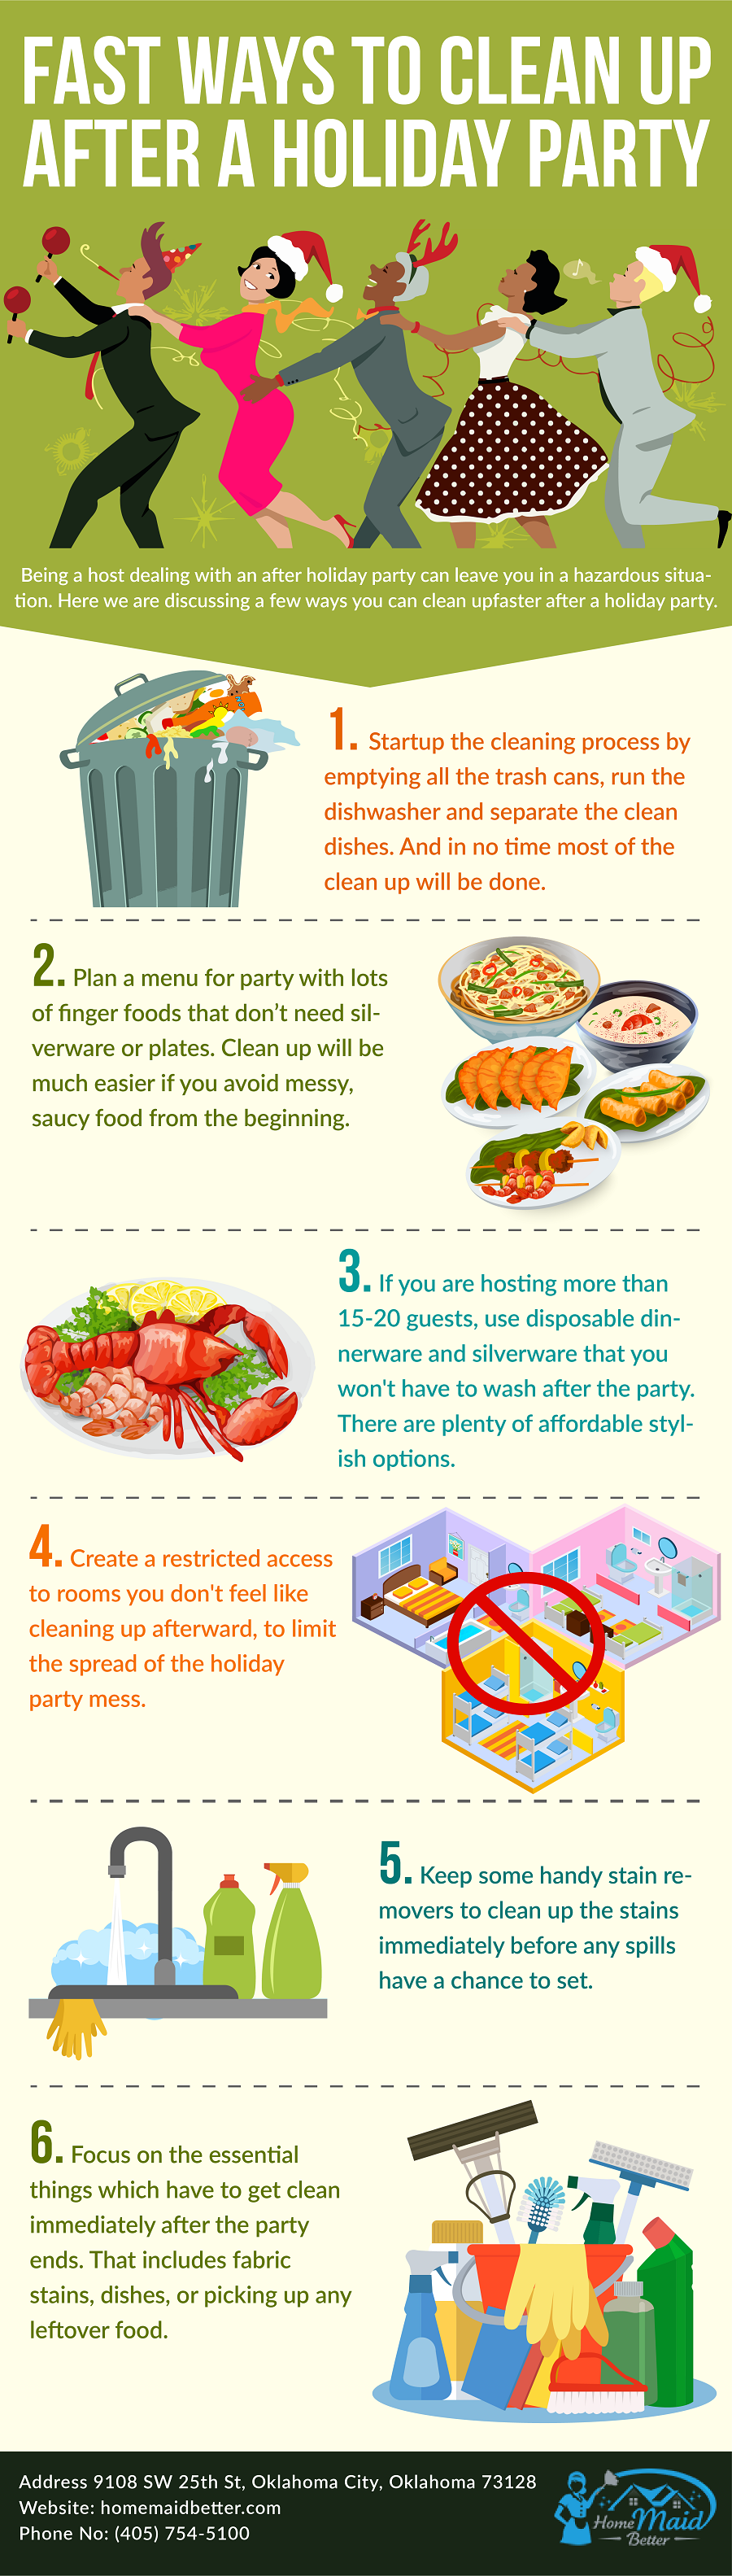 https://homemaidbetter.com/wp-content/uploads/2018/01/Fast-Ways-To-CLean-Up-After-A-Holiday-Party.png